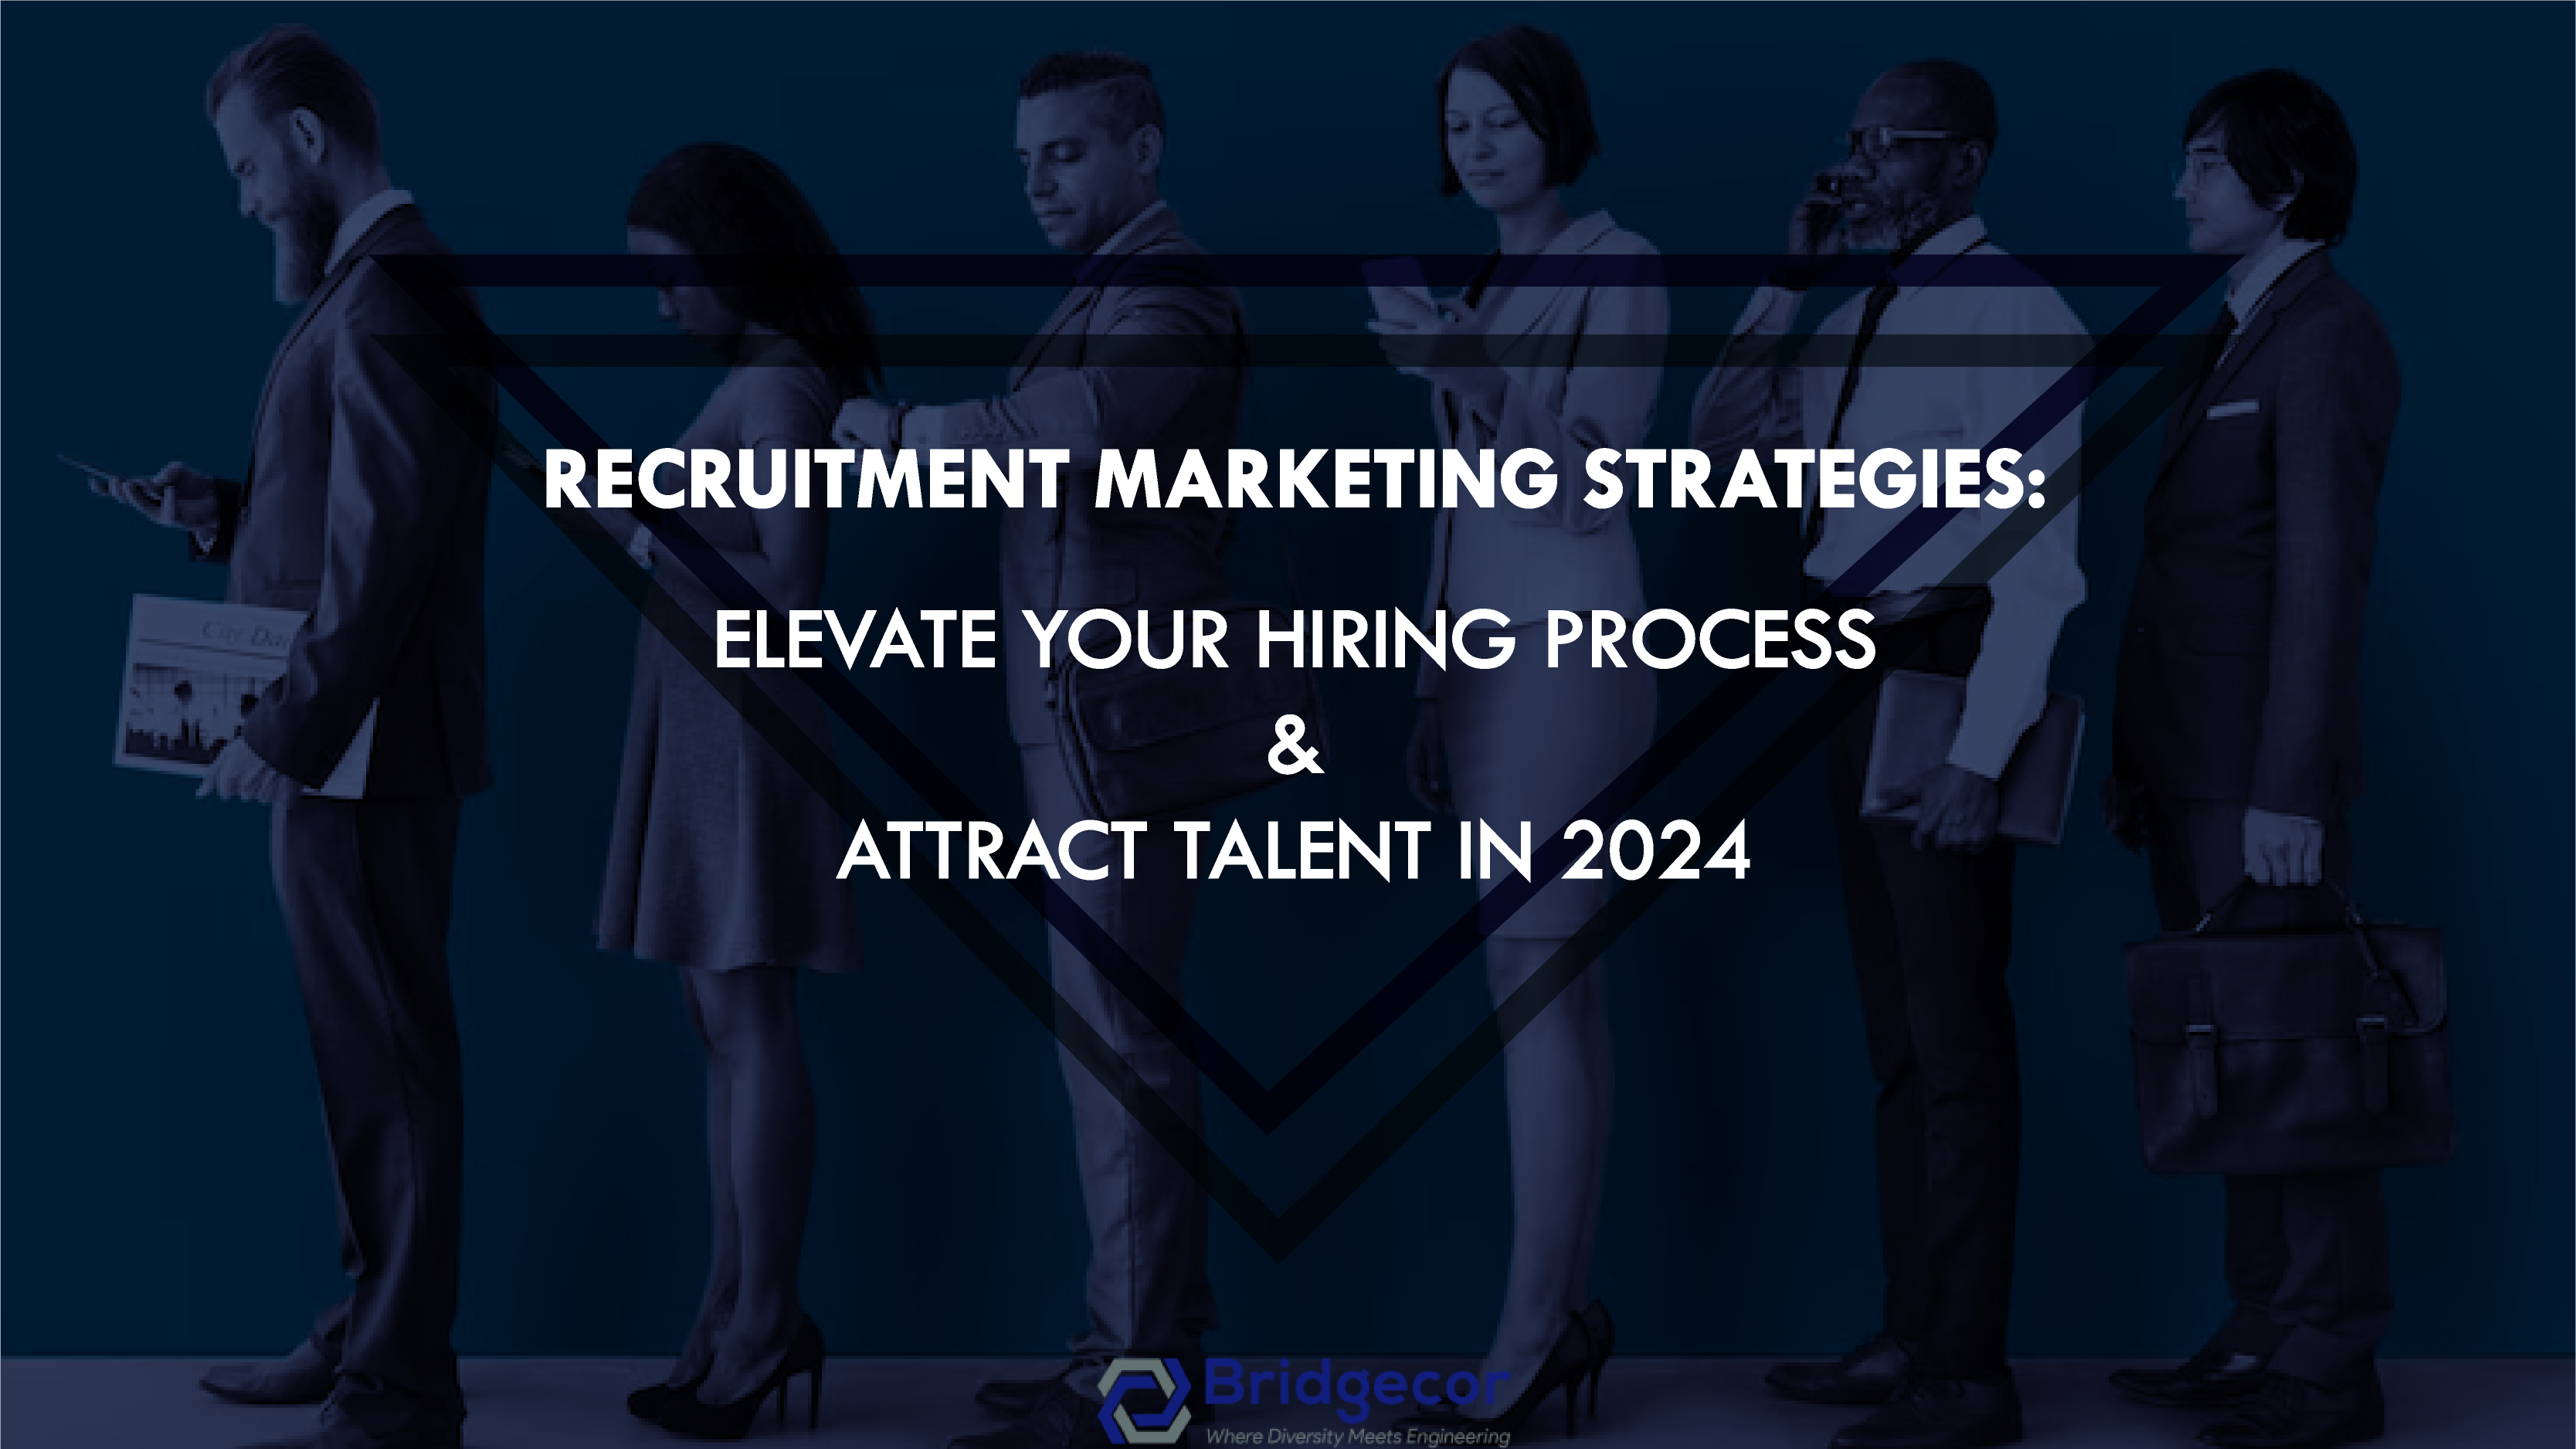 Recruitment Marketing Strategies: Improve Your Hiring Process and Attract Talent in 2024